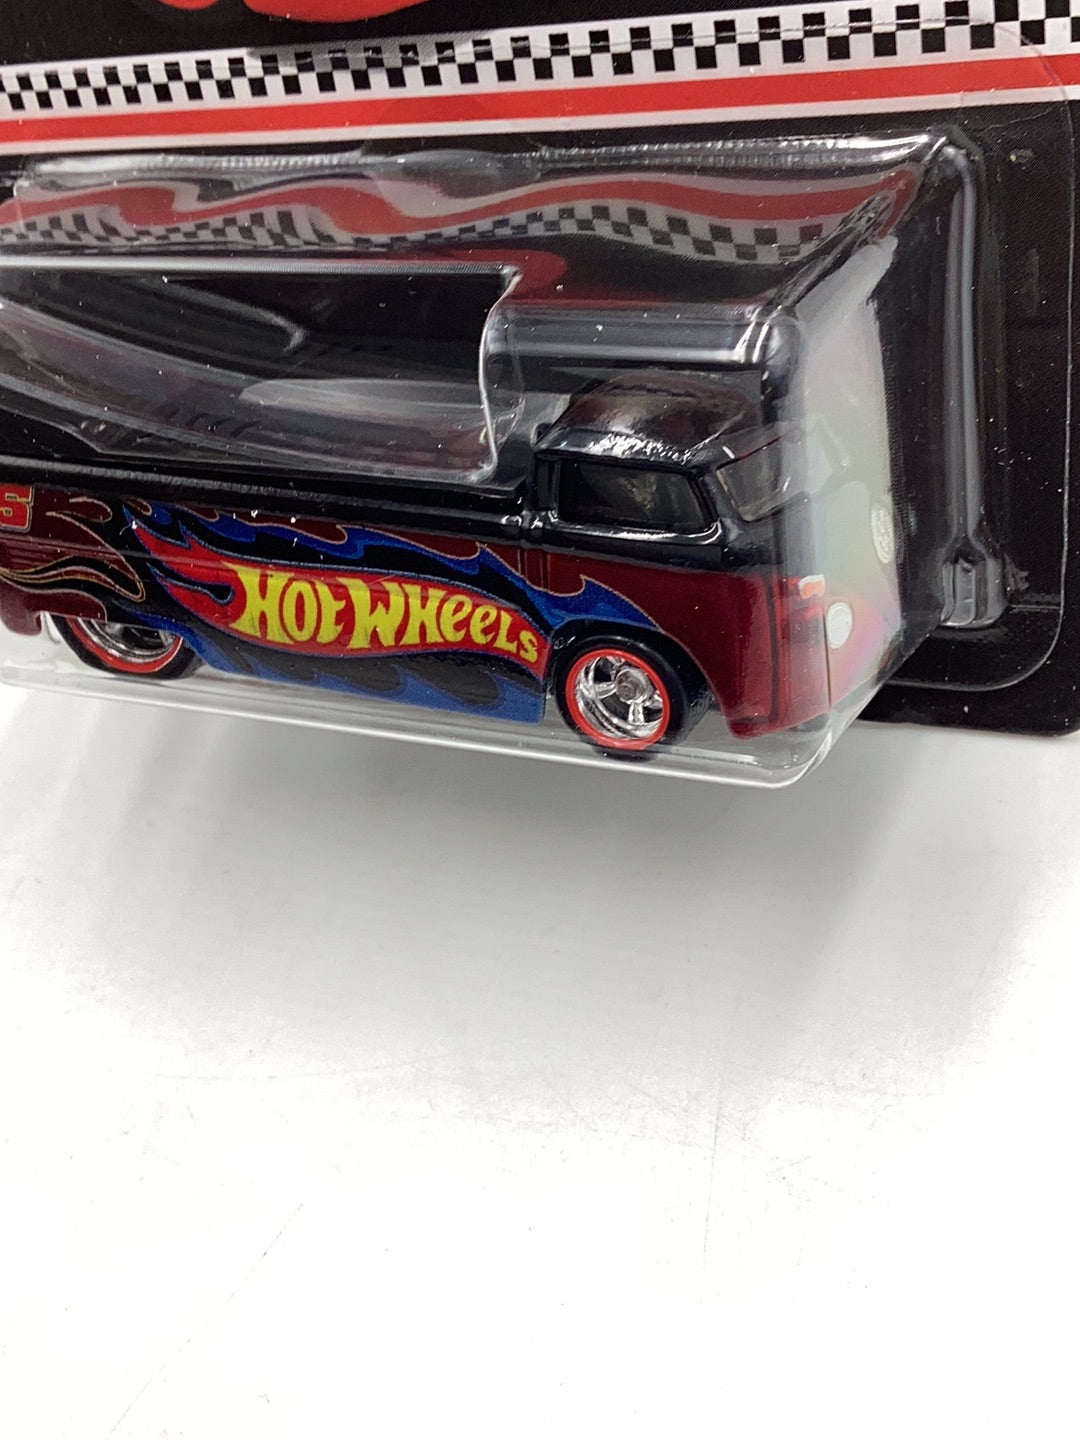 Hot wheels 2018 mail in collectors edition factory sealed sticker Volkswagen Drag Truck with protector